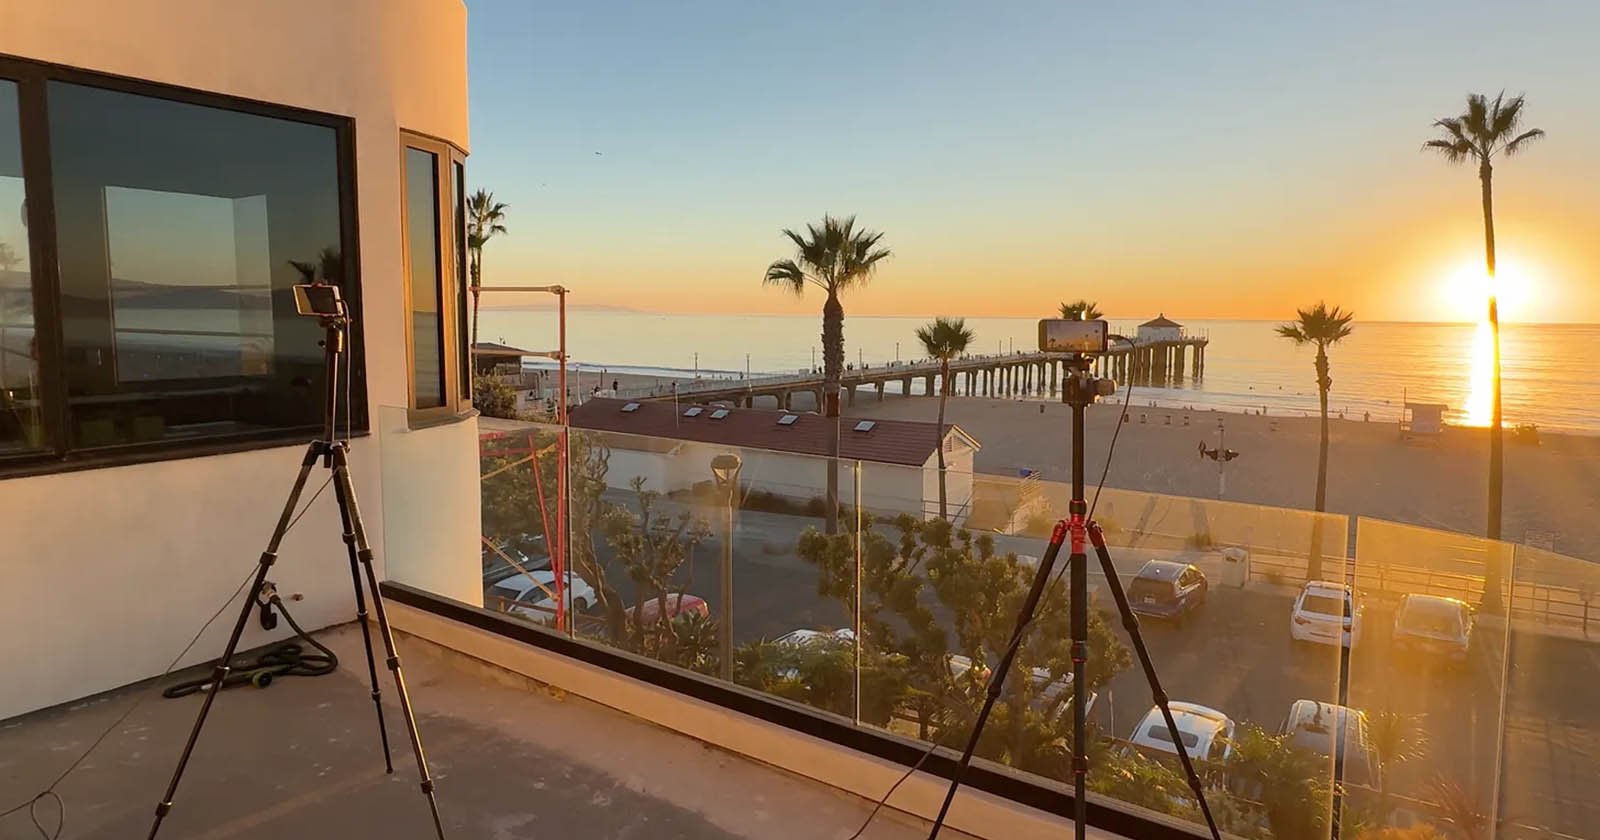  how made 10-day timelapse video iphone galaxy 